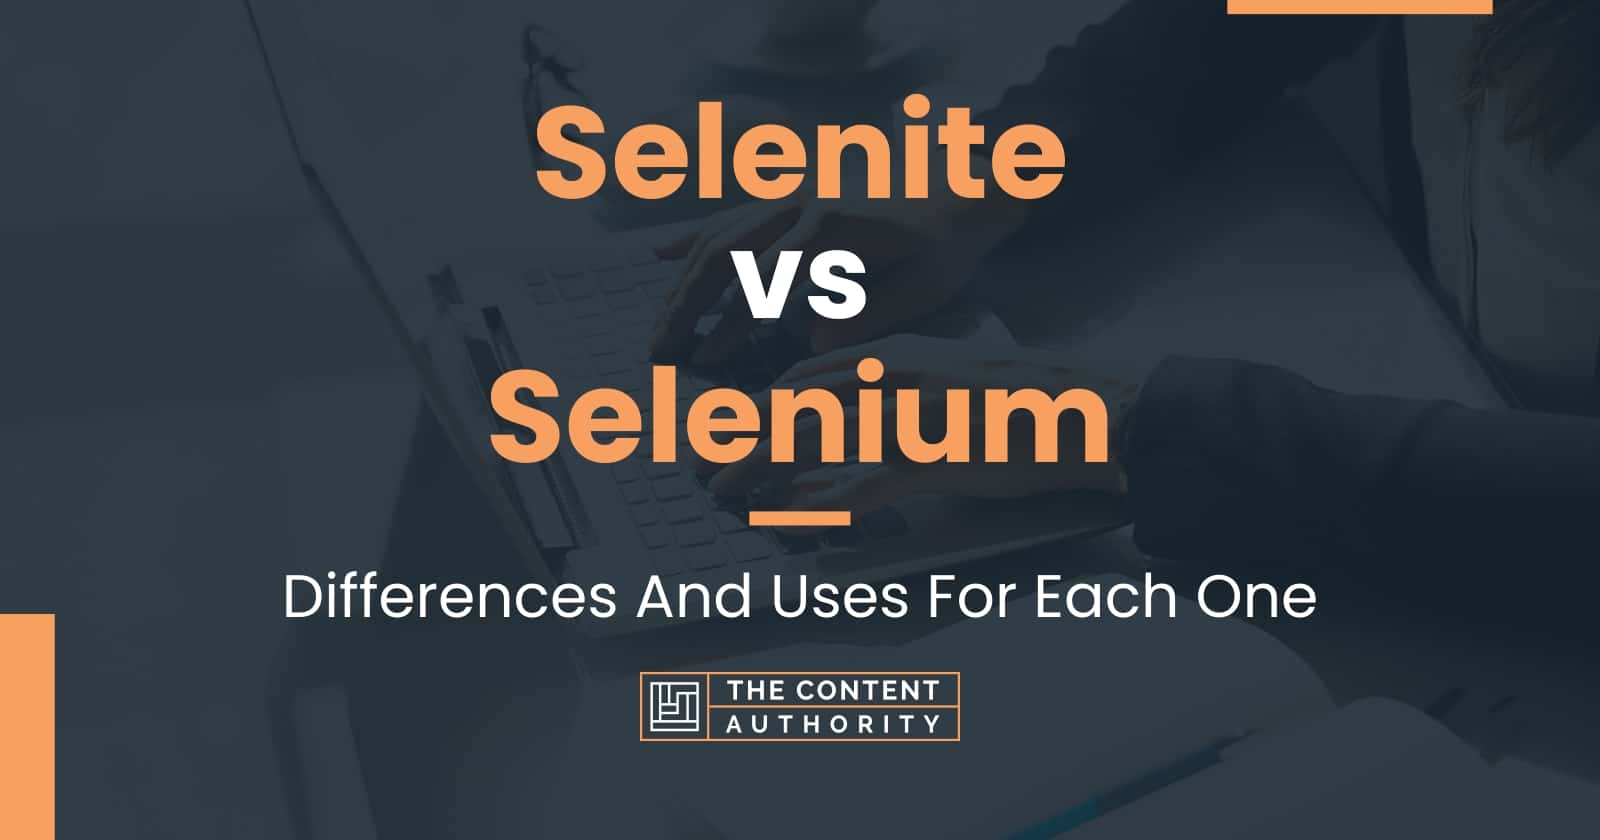 Selenite vs Selenium: Differences And Uses For Each One